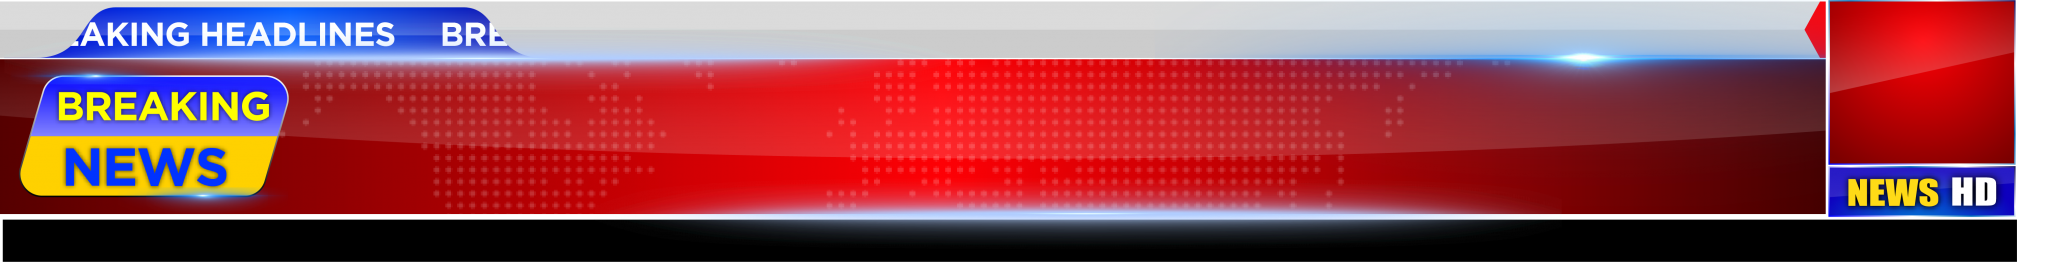 Breaking News Template PNG Image HD